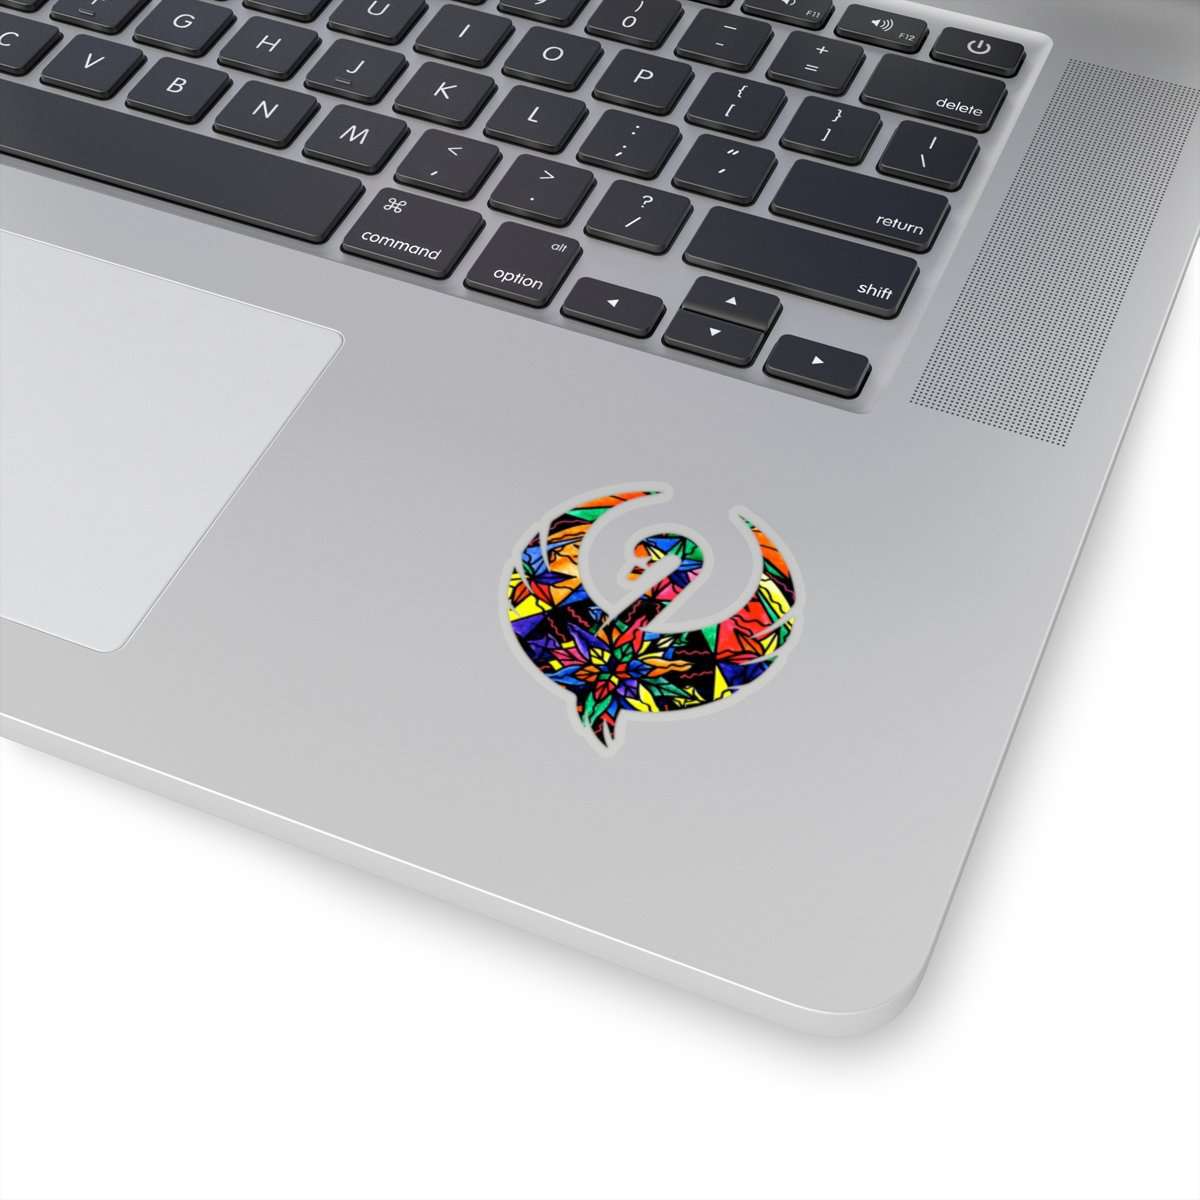 buy-cheap-wholesale-reveal-the-mystery-swan-stickers-hot-on-sale_1.jpg